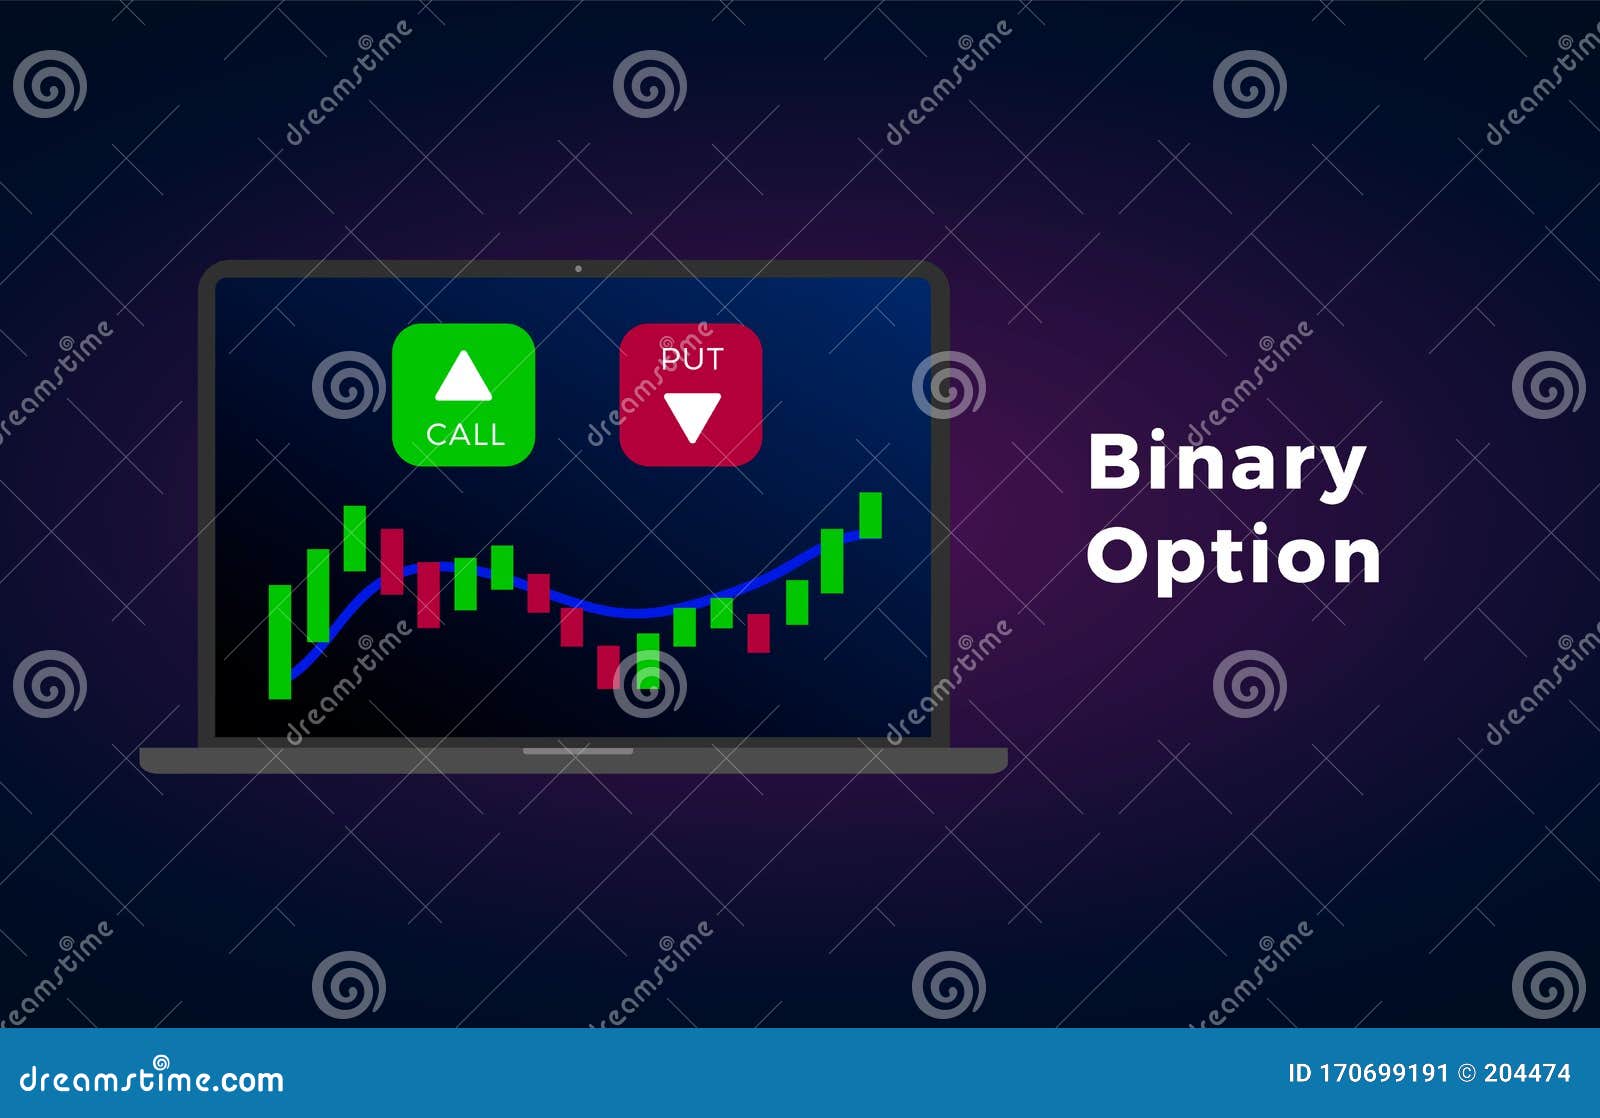 suggestions for put and call in binary options